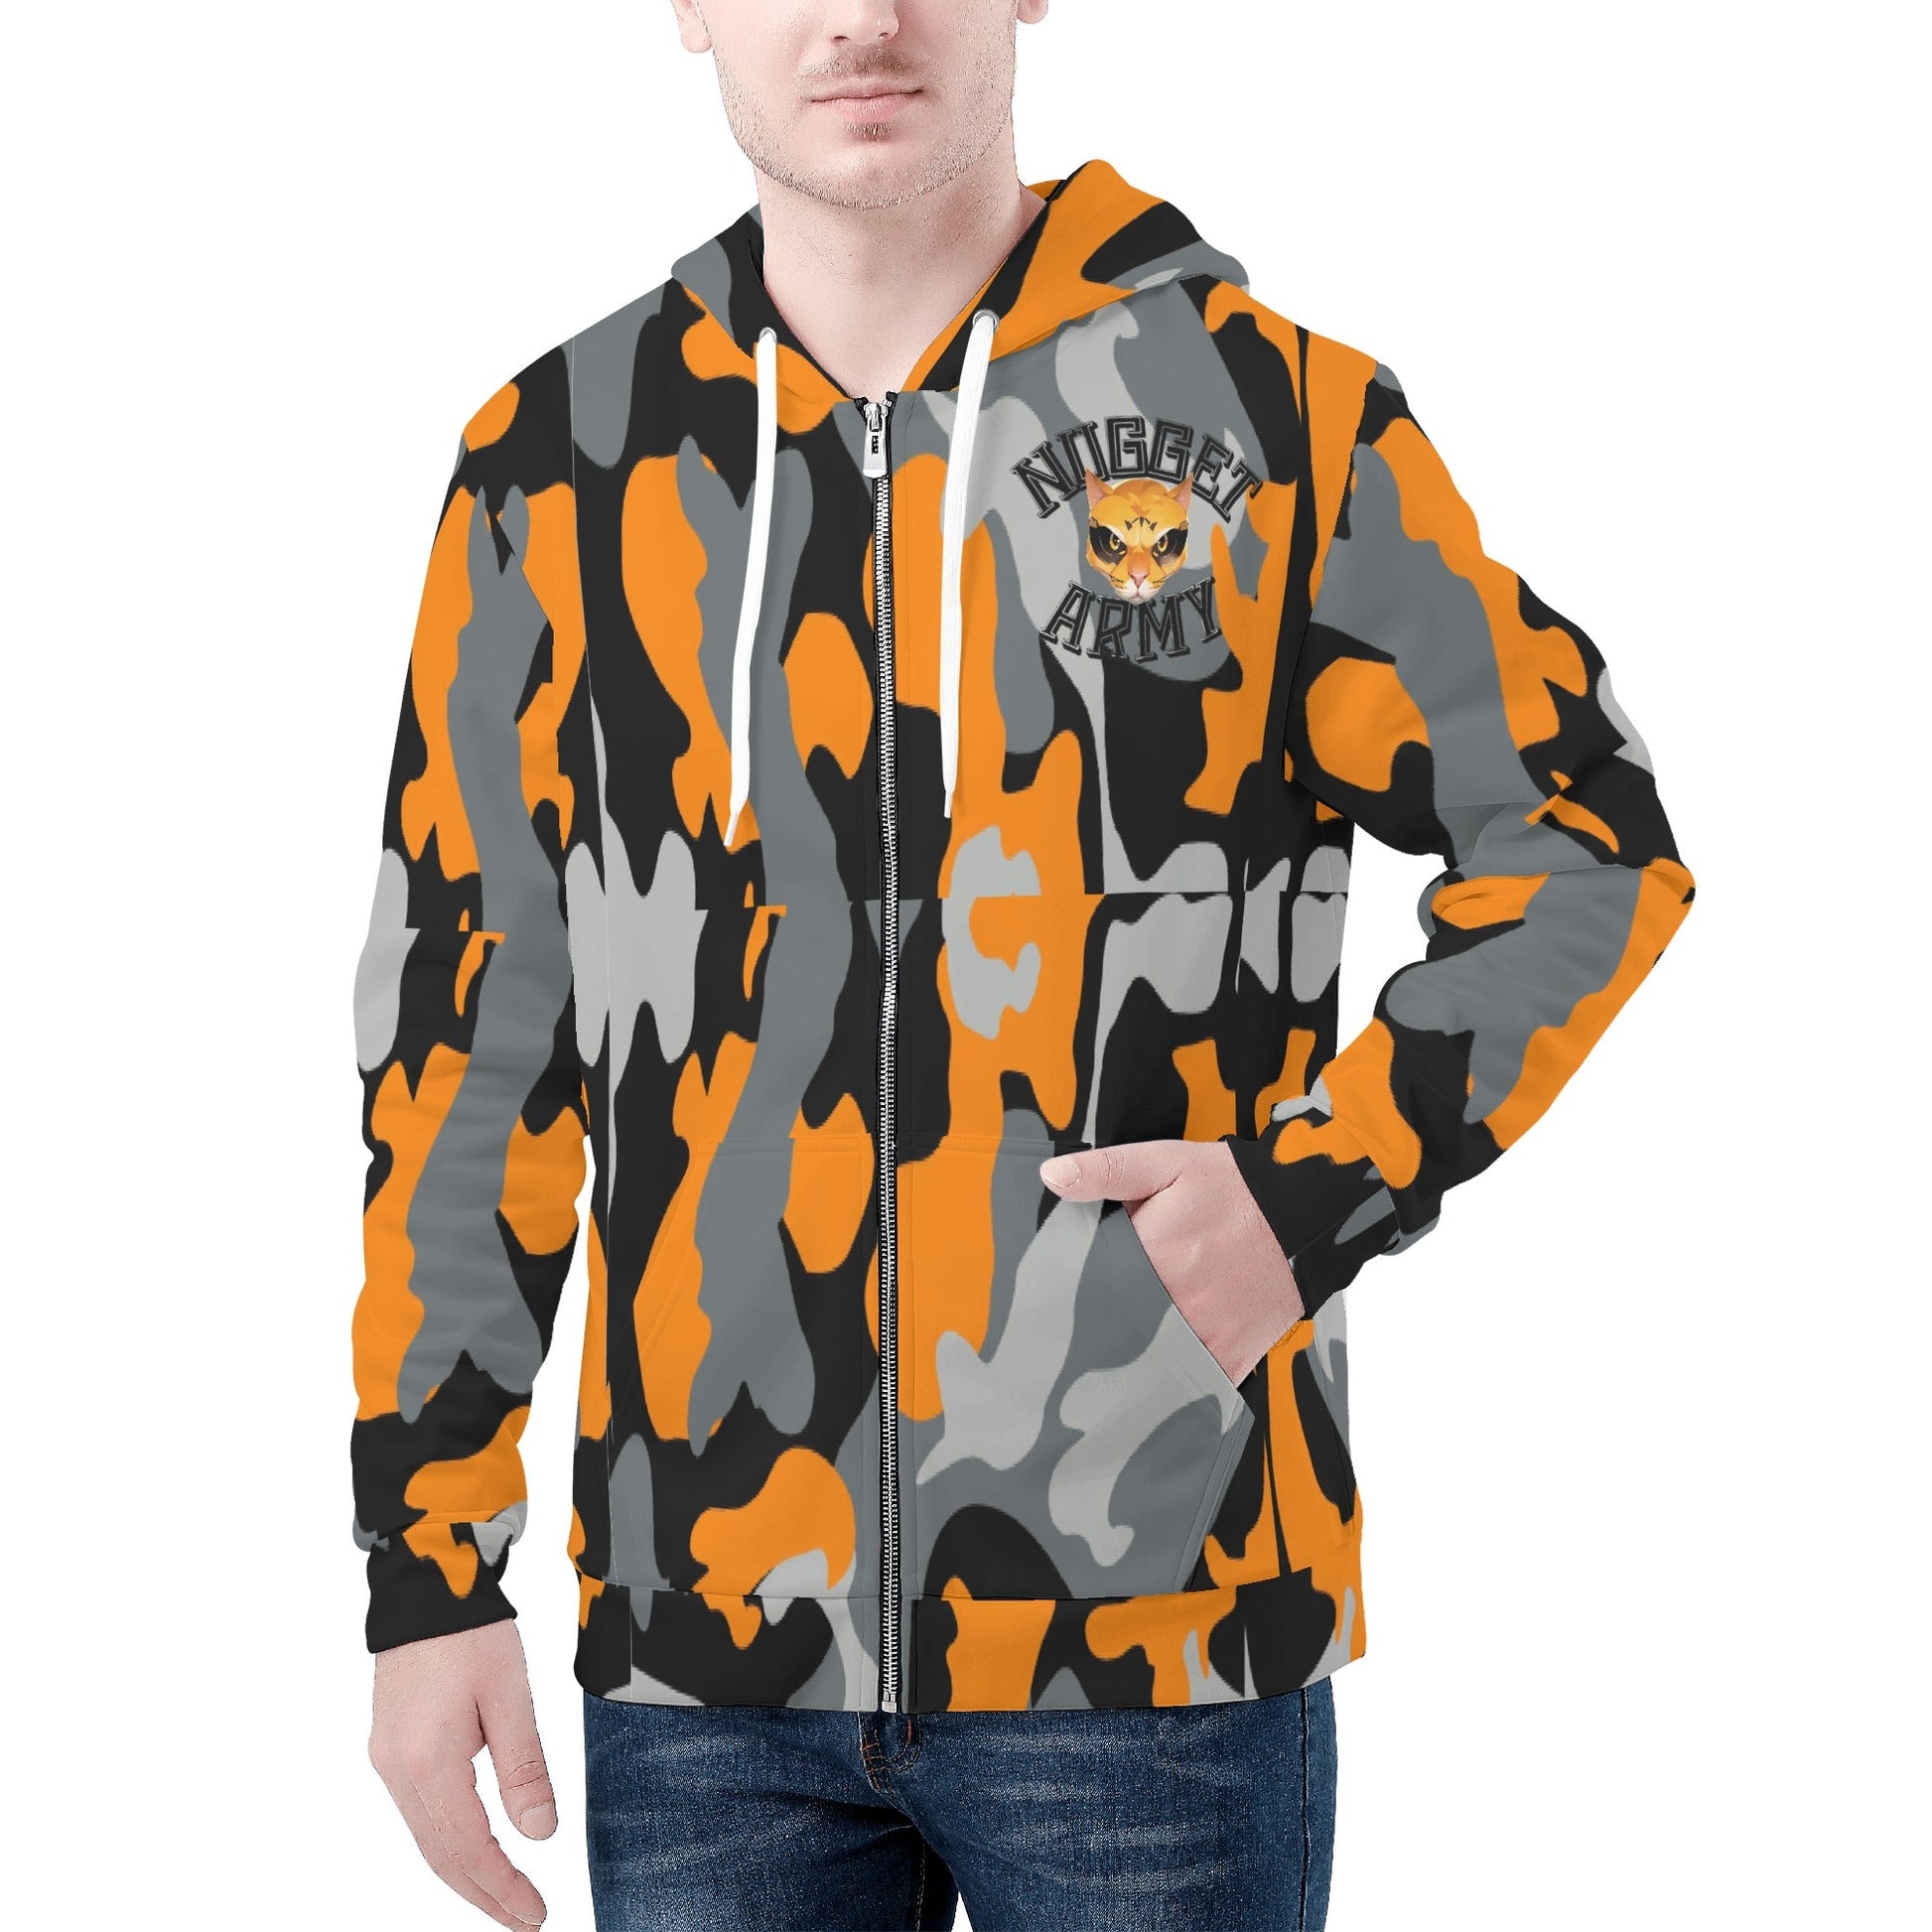 Stand out  with the  Nugget Army Vet Mens Zip Up Hoodie  available at Hey Nugget. Grab yours today!